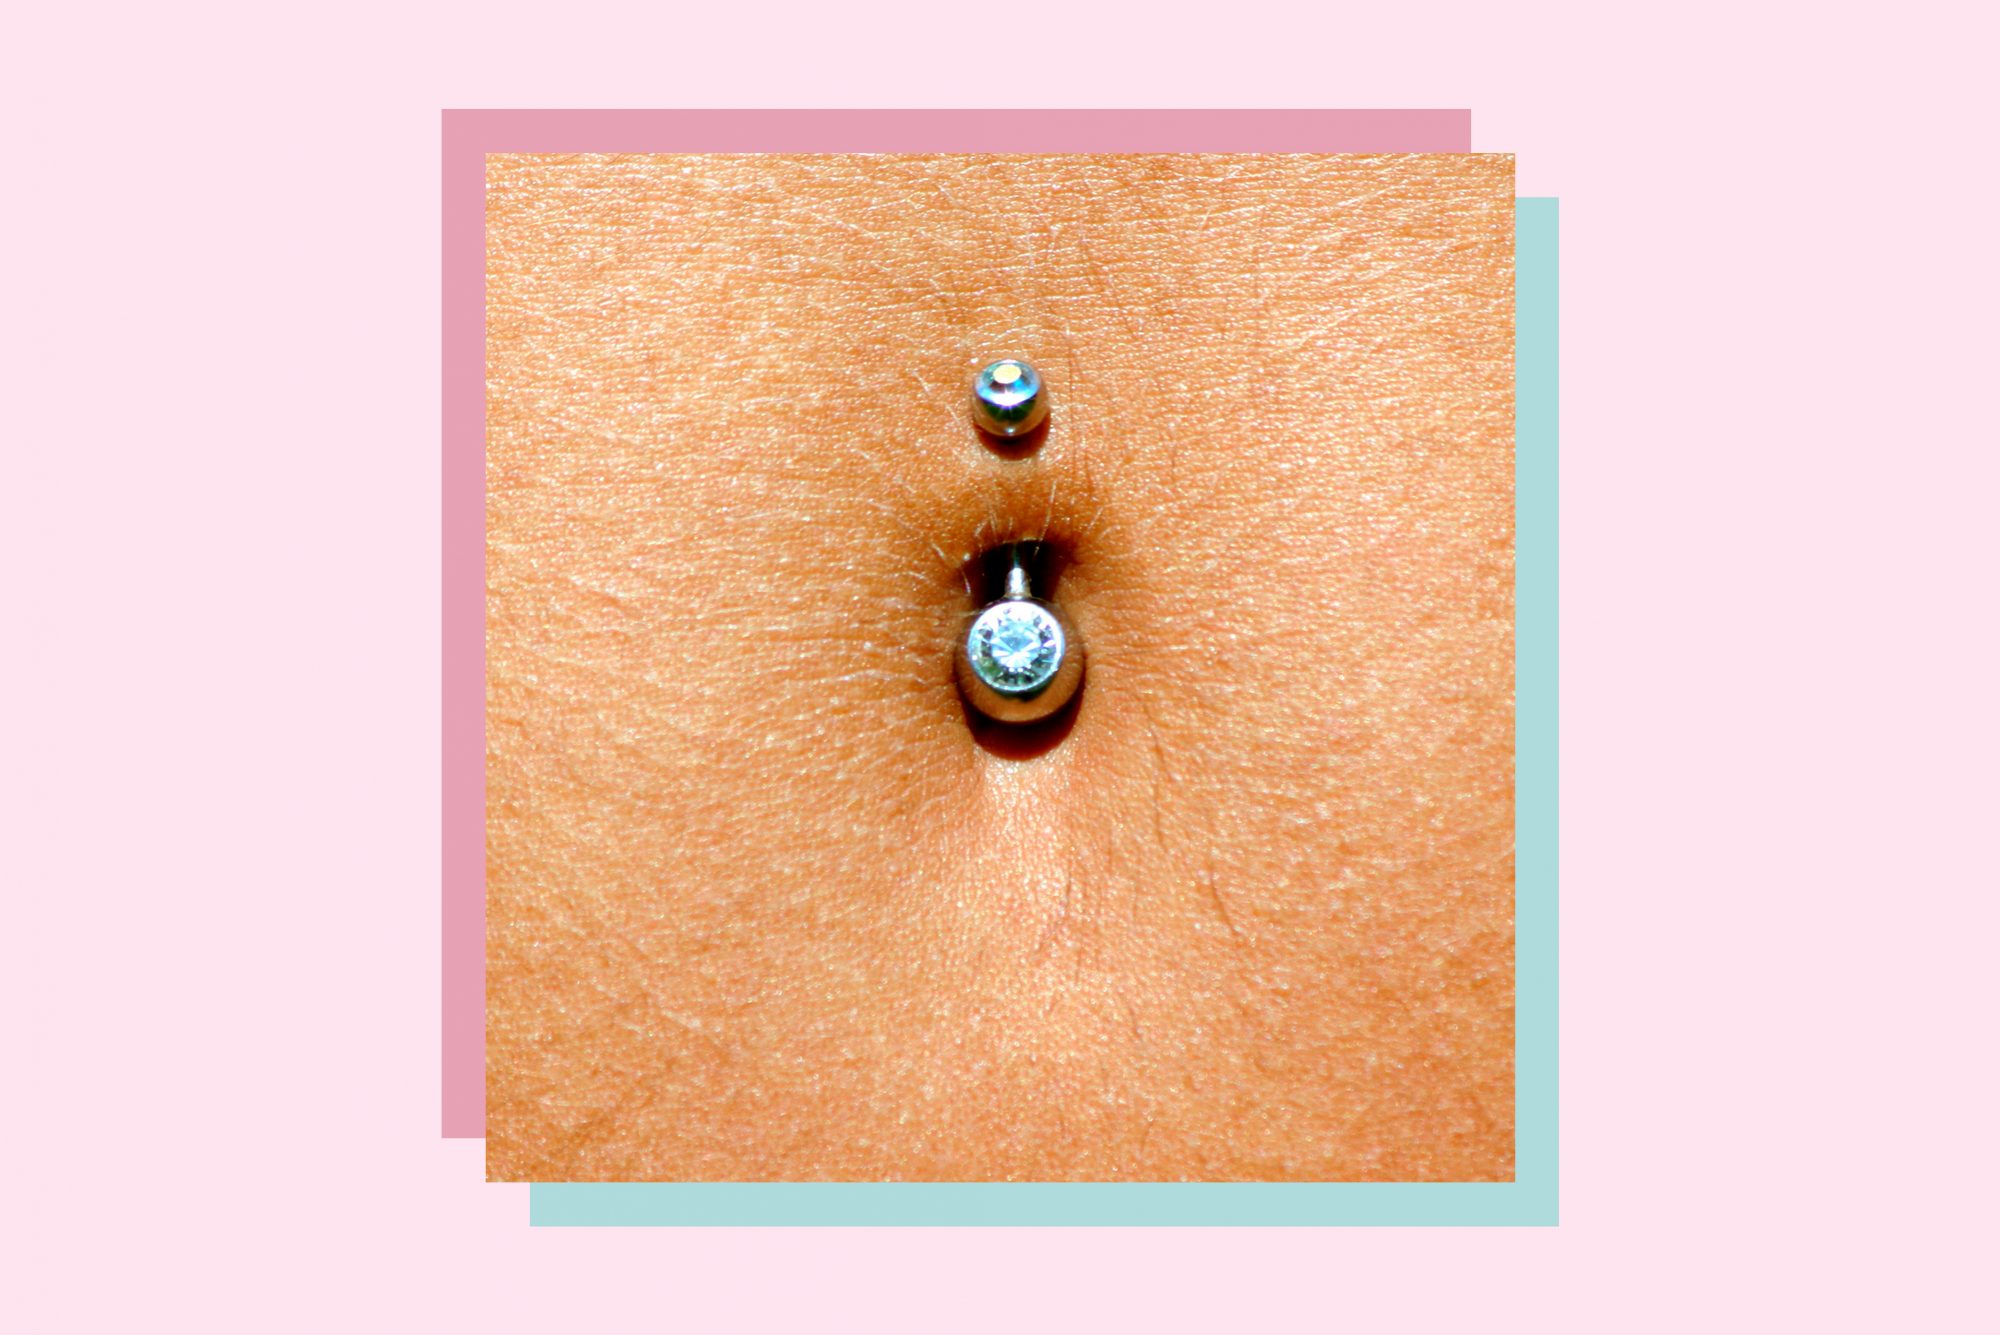 An image of a belly button ring.